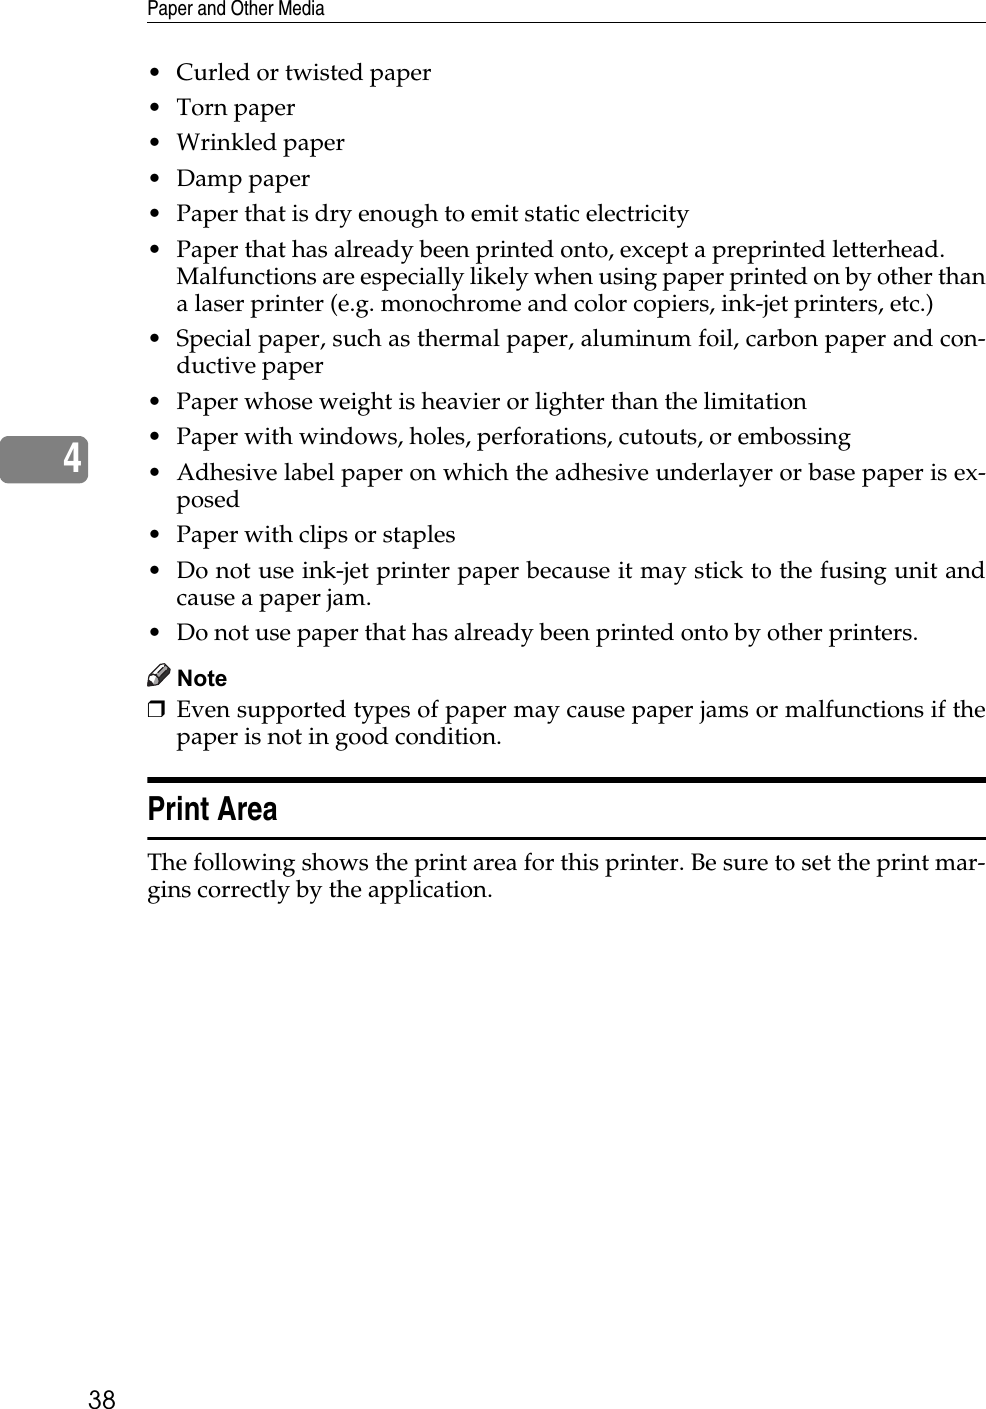 Paper and Other Media384• Curled or twisted paper• Torn paper• Wrinkled paper• Damp paper• Paper that is dry enough to emit static electricity• Paper that has already been printed onto, except a preprinted letterhead.Malfunctions are especially likely when using paper printed on by other thana laser printer (e.g. monochrome and color copiers, ink-jet printers, etc.)• Special paper, such as thermal paper, aluminum foil, carbon paper and con-ductive paper• Paper whose weight is heavier or lighter than the limitation• Paper with windows, holes, perforations, cutouts, or embossing• Adhesive label paper on which the adhesive underlayer or base paper is ex-posed• Paper with clips or staples• Do not use ink-jet printer paper because it may stick to the fusing unit andcause a paper jam.• Do not use paper that has already been printed onto by other printers.Note❒Even supported types of paper may cause paper jams or malfunctions if thepaper is not in good condition.Print AreaThe following shows the print area for this printer. Be sure to set the print mar-gins correctly by the application.